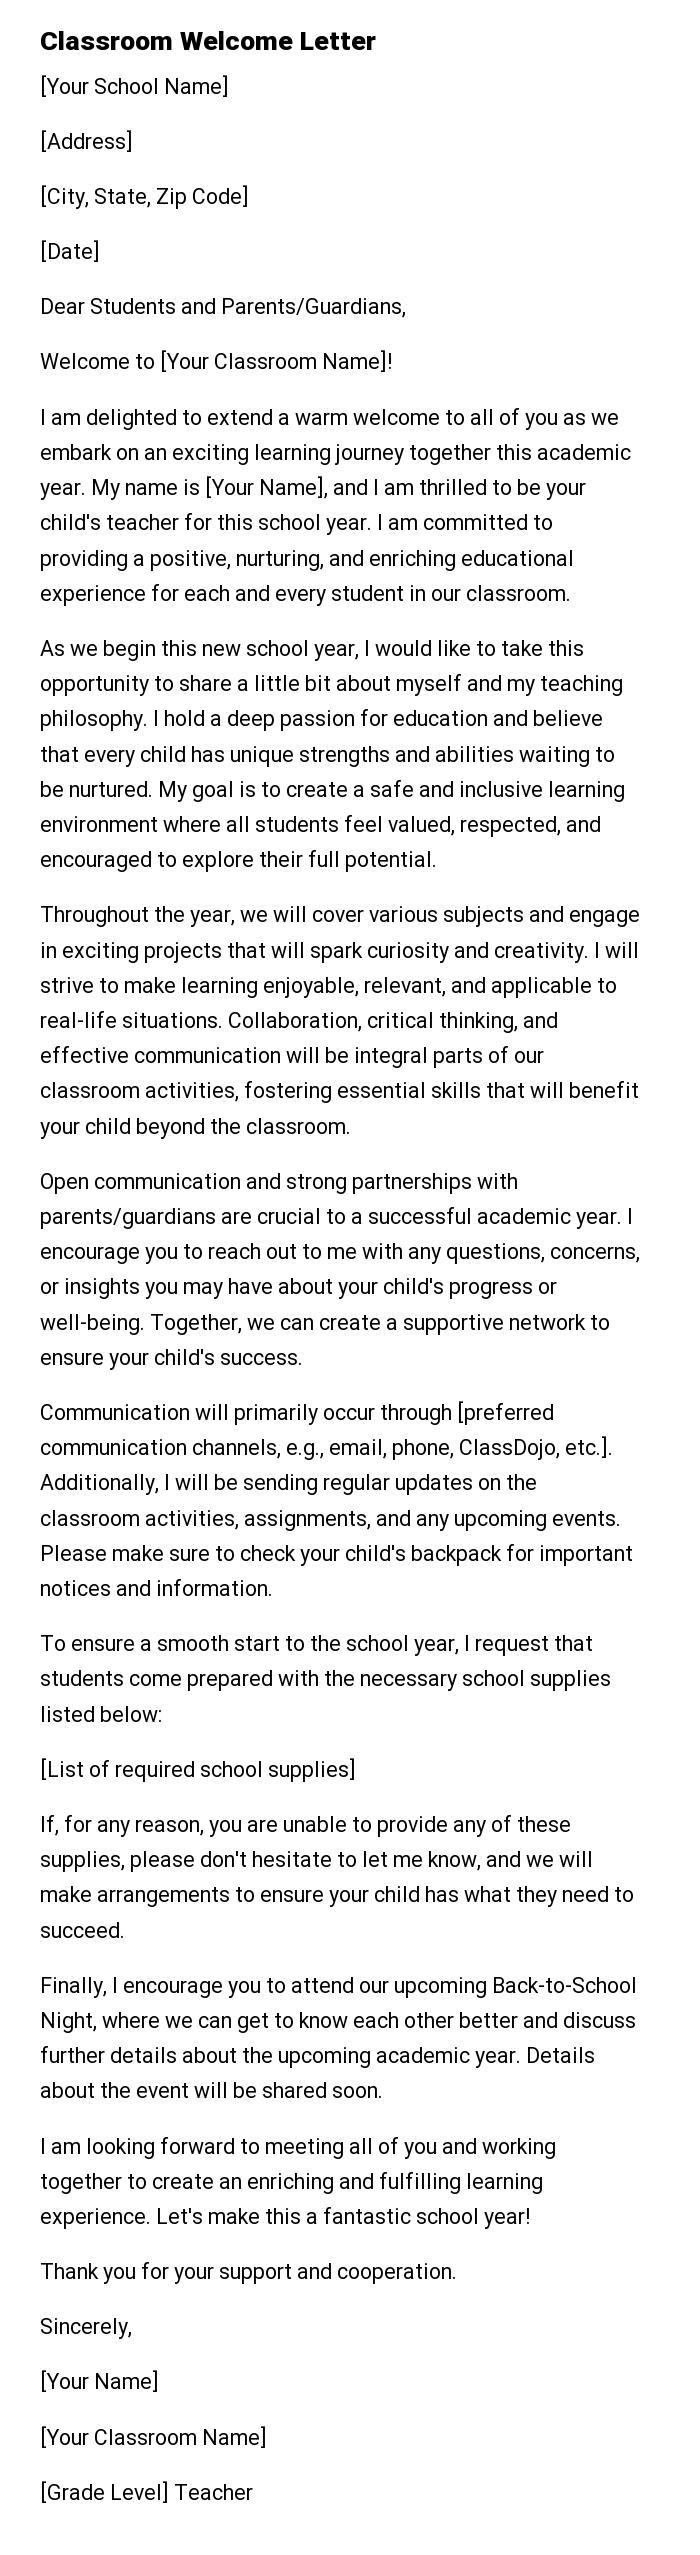 Classroom Welcome Letter